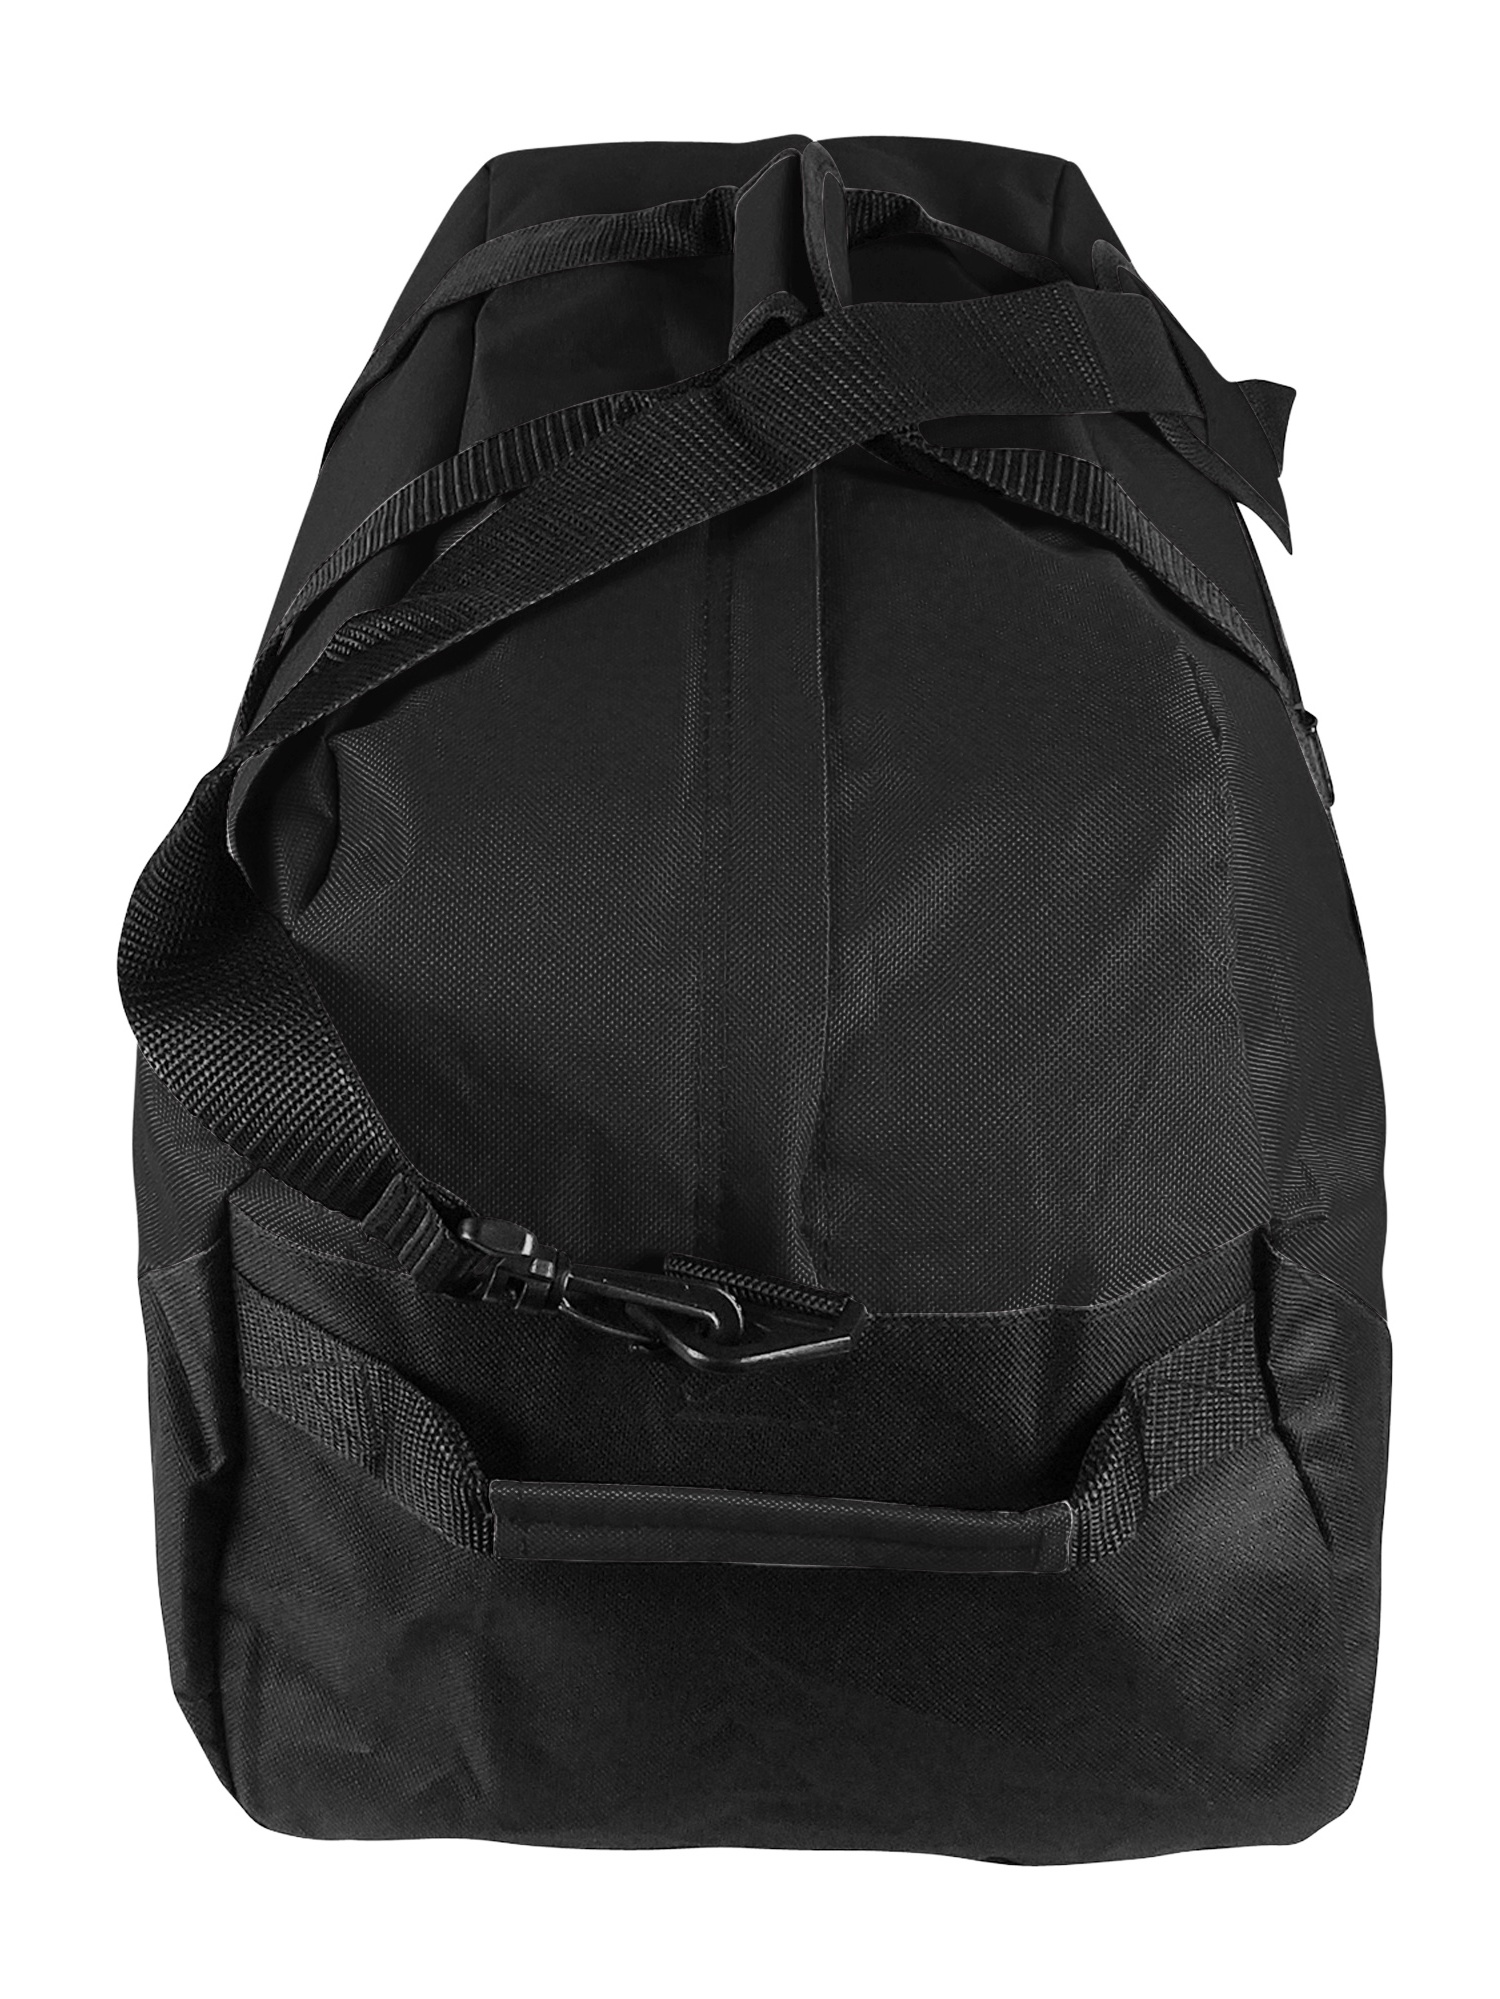 21 Large Duffle Bag with Adjustable Strap in Black - image 2 of 4